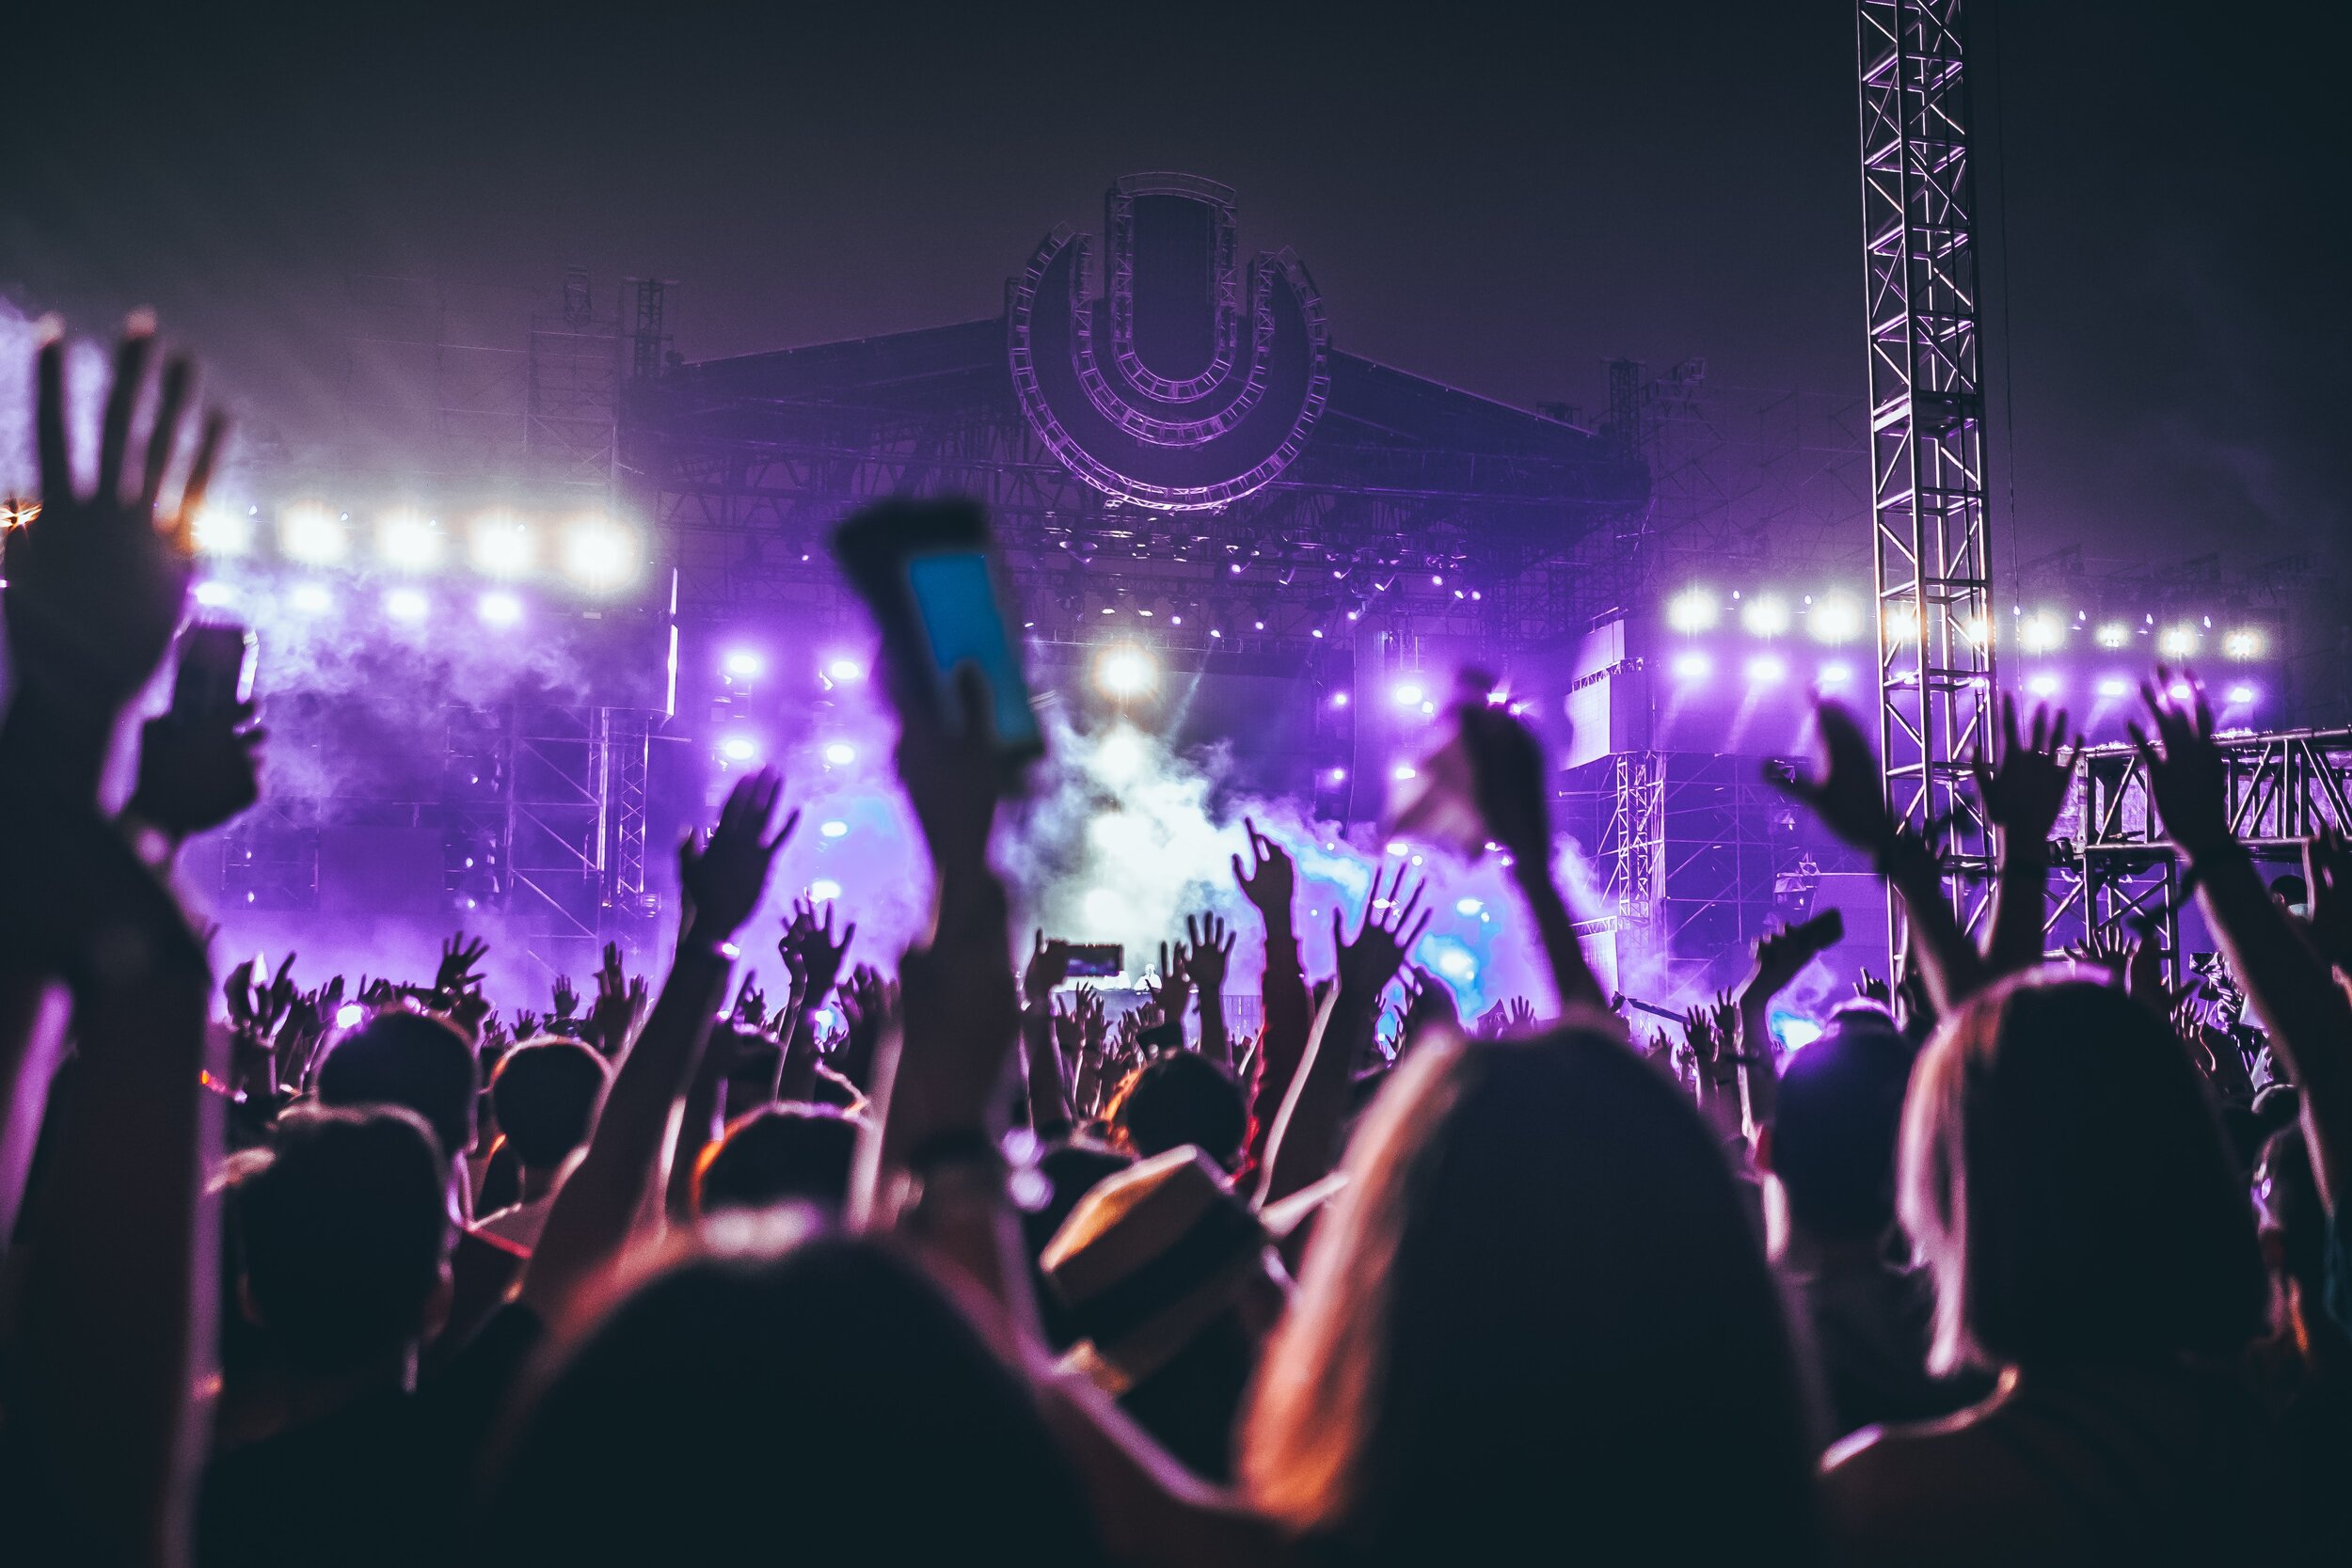 How to get into music festival planning